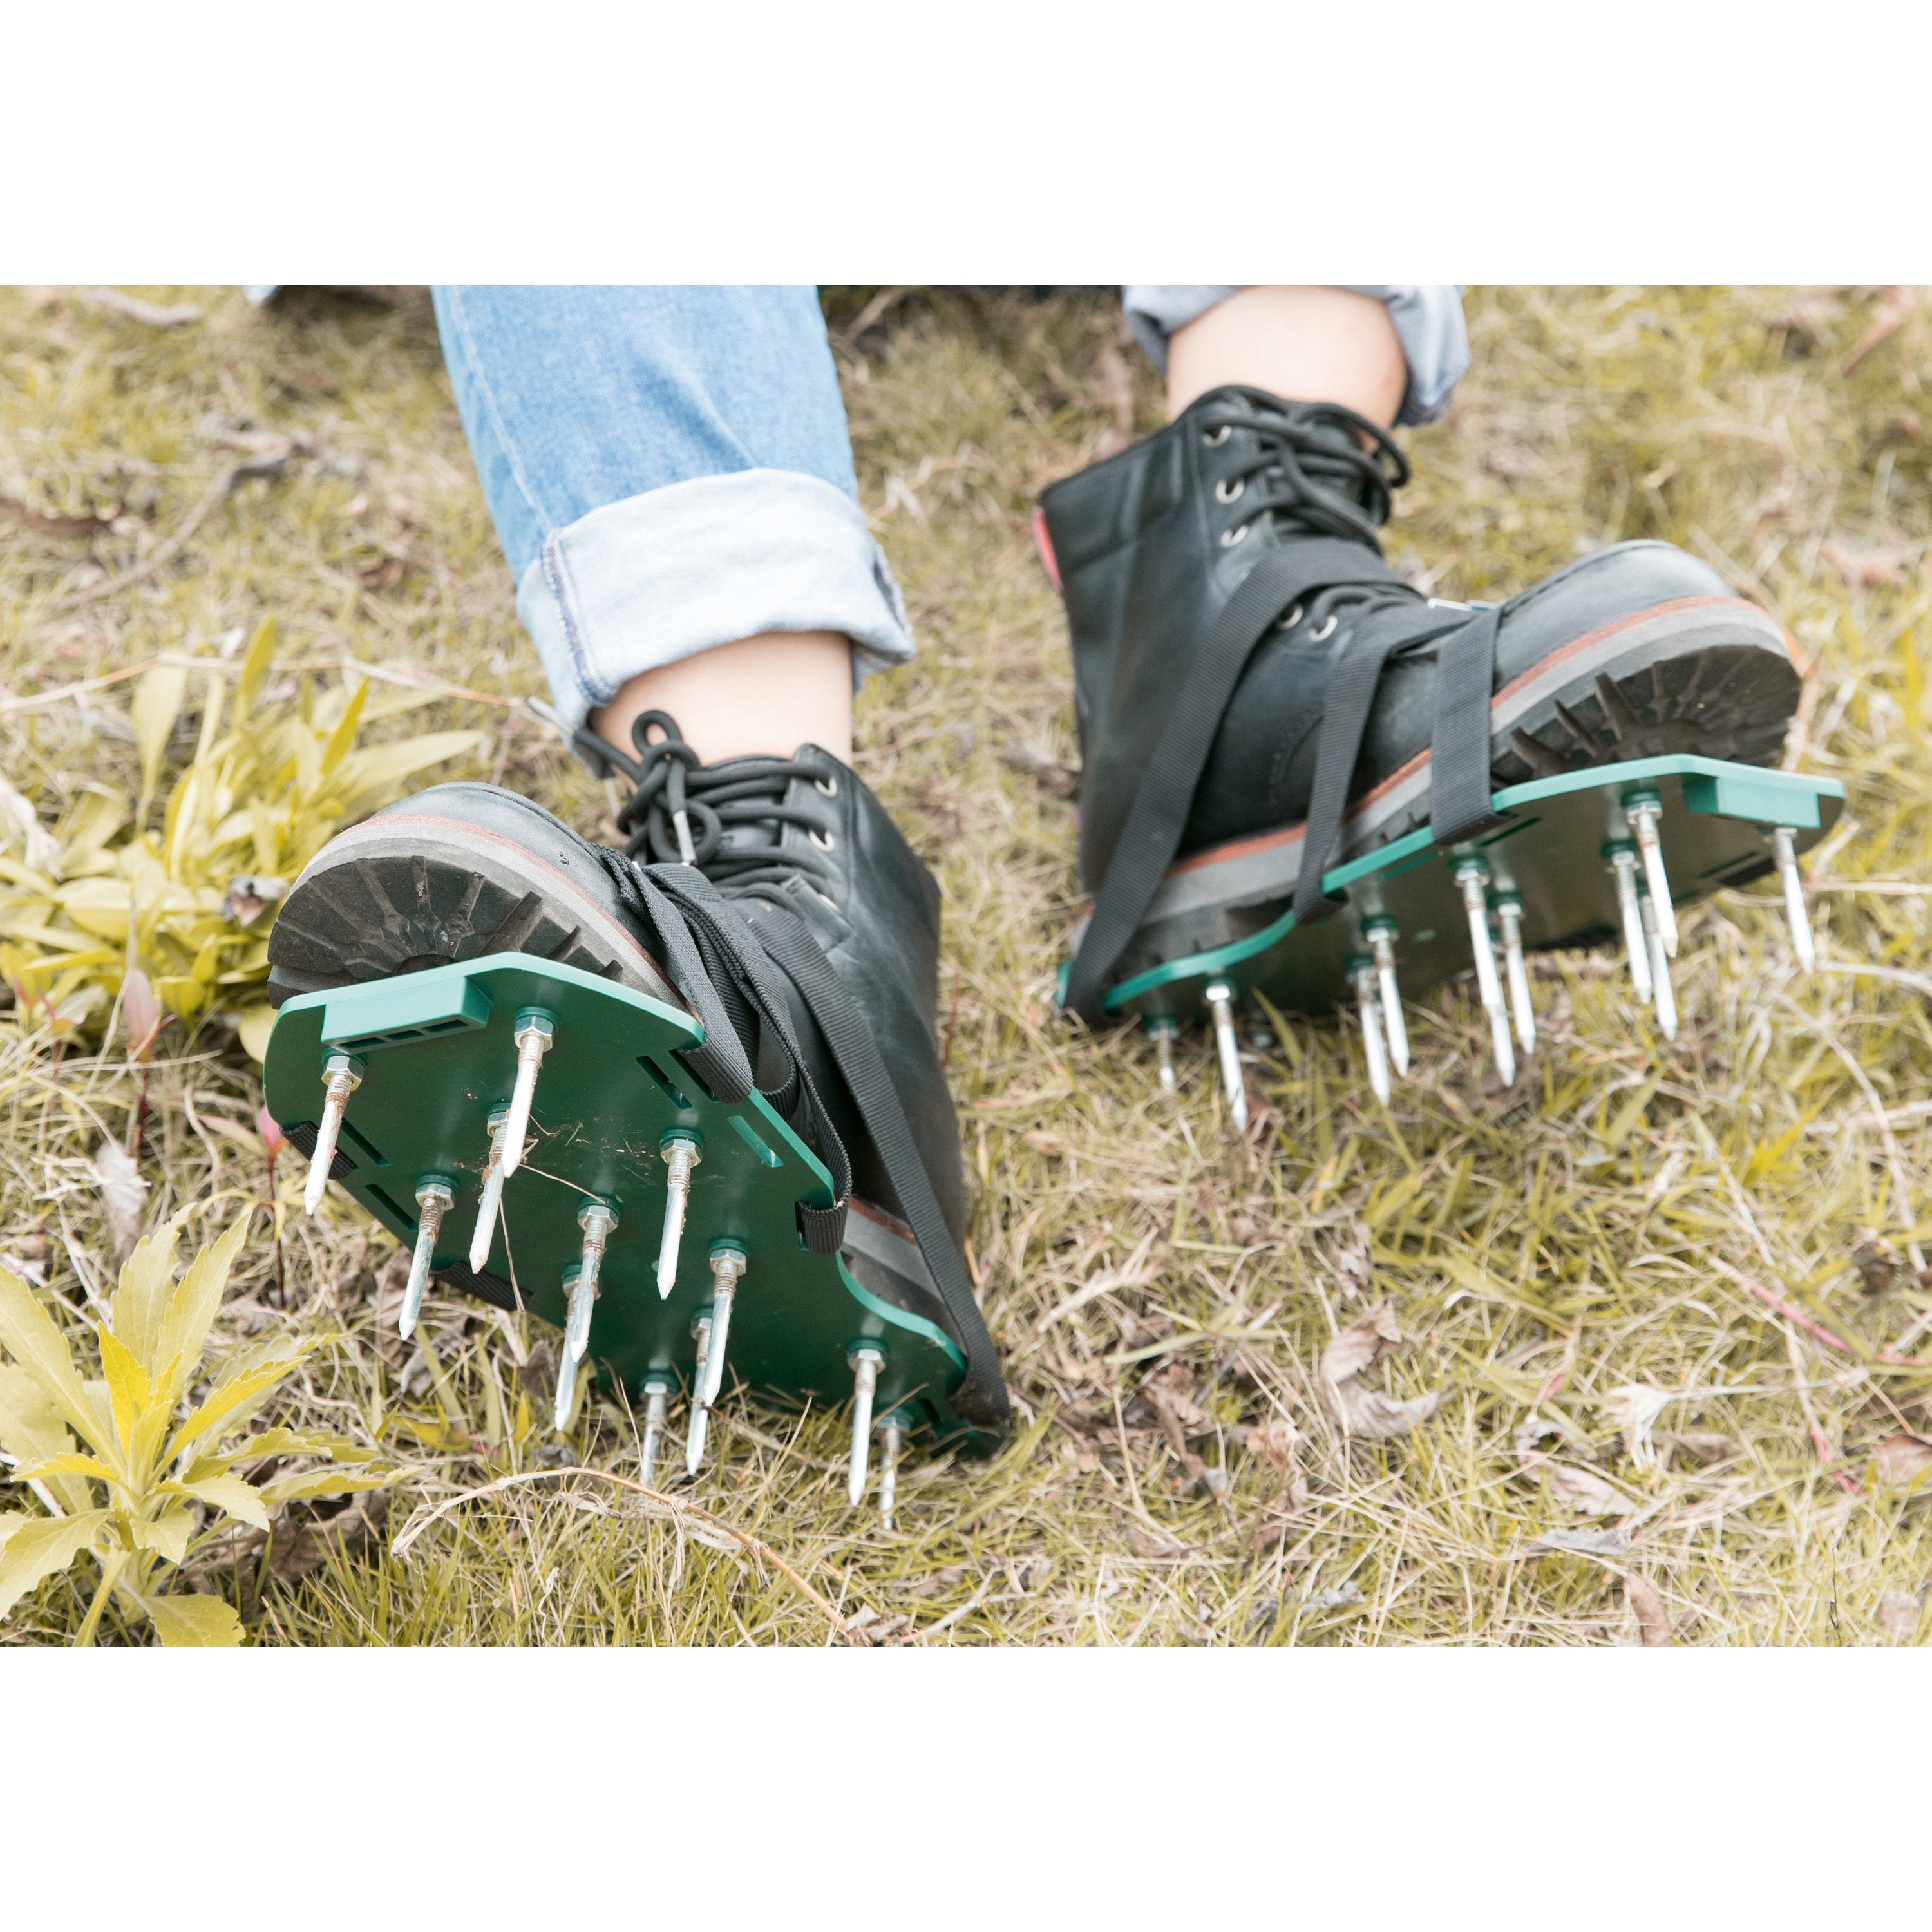 Gardenised Lawn and Garden Aerator Metal Spike Shoe